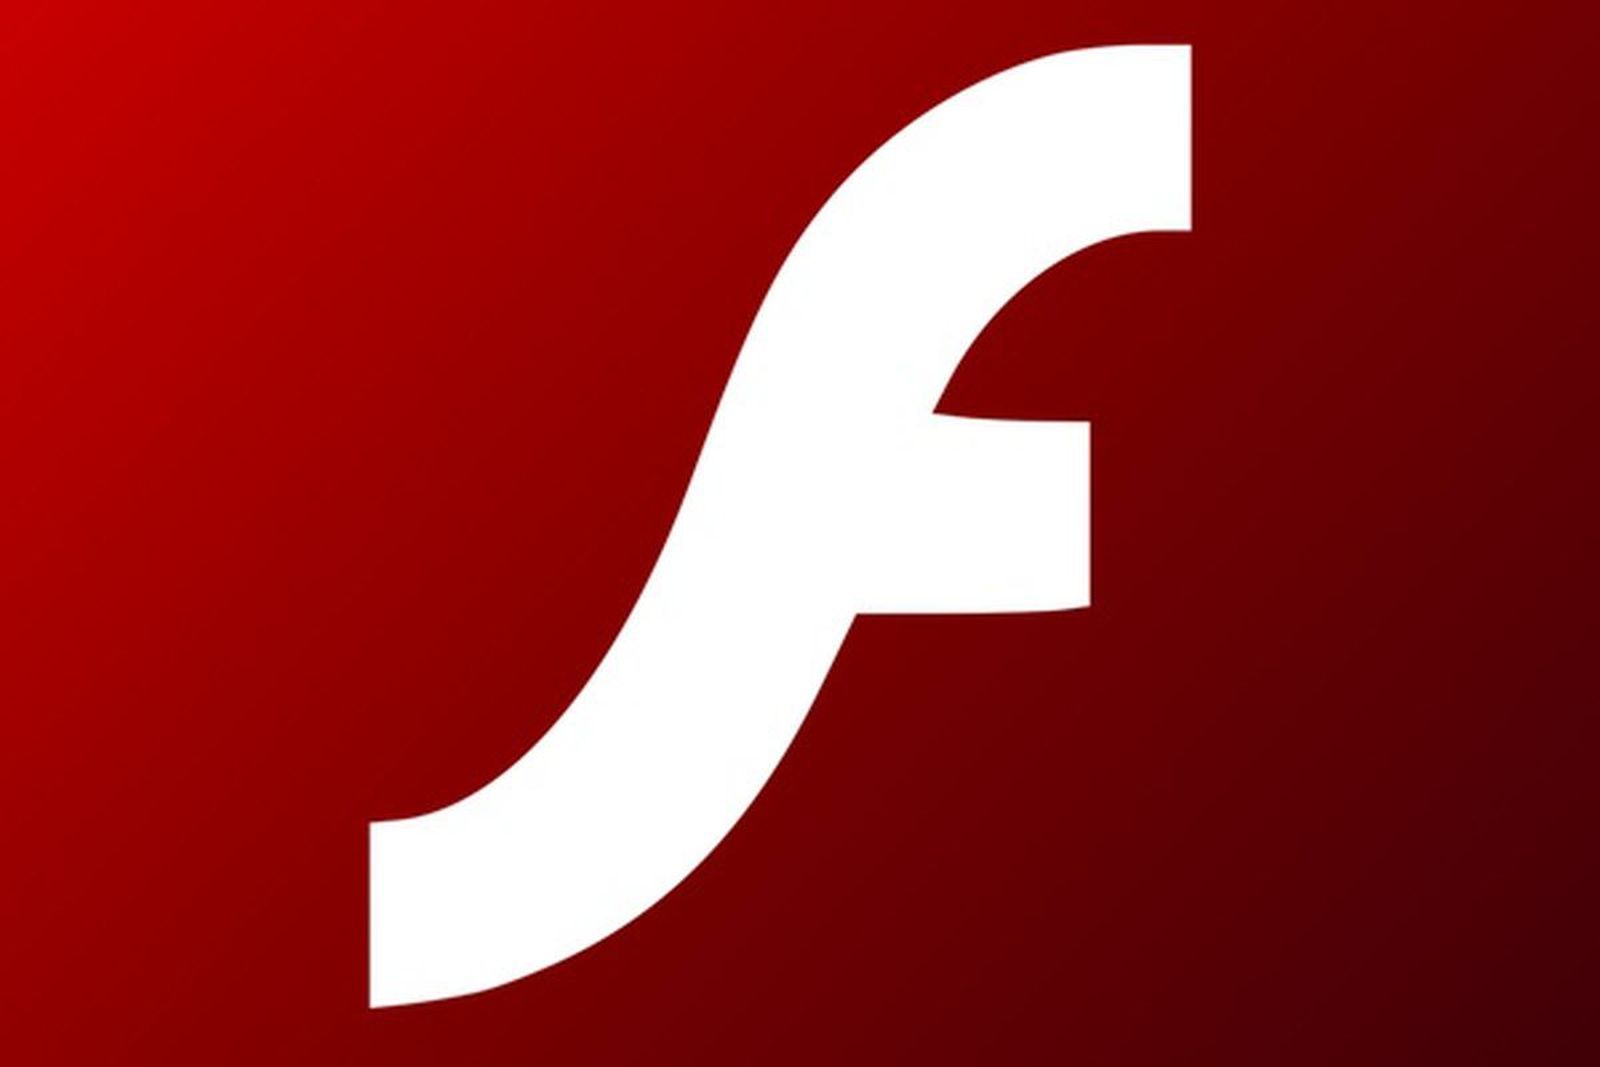 Adobe officially ends Flash support, recommends immediate uninstall